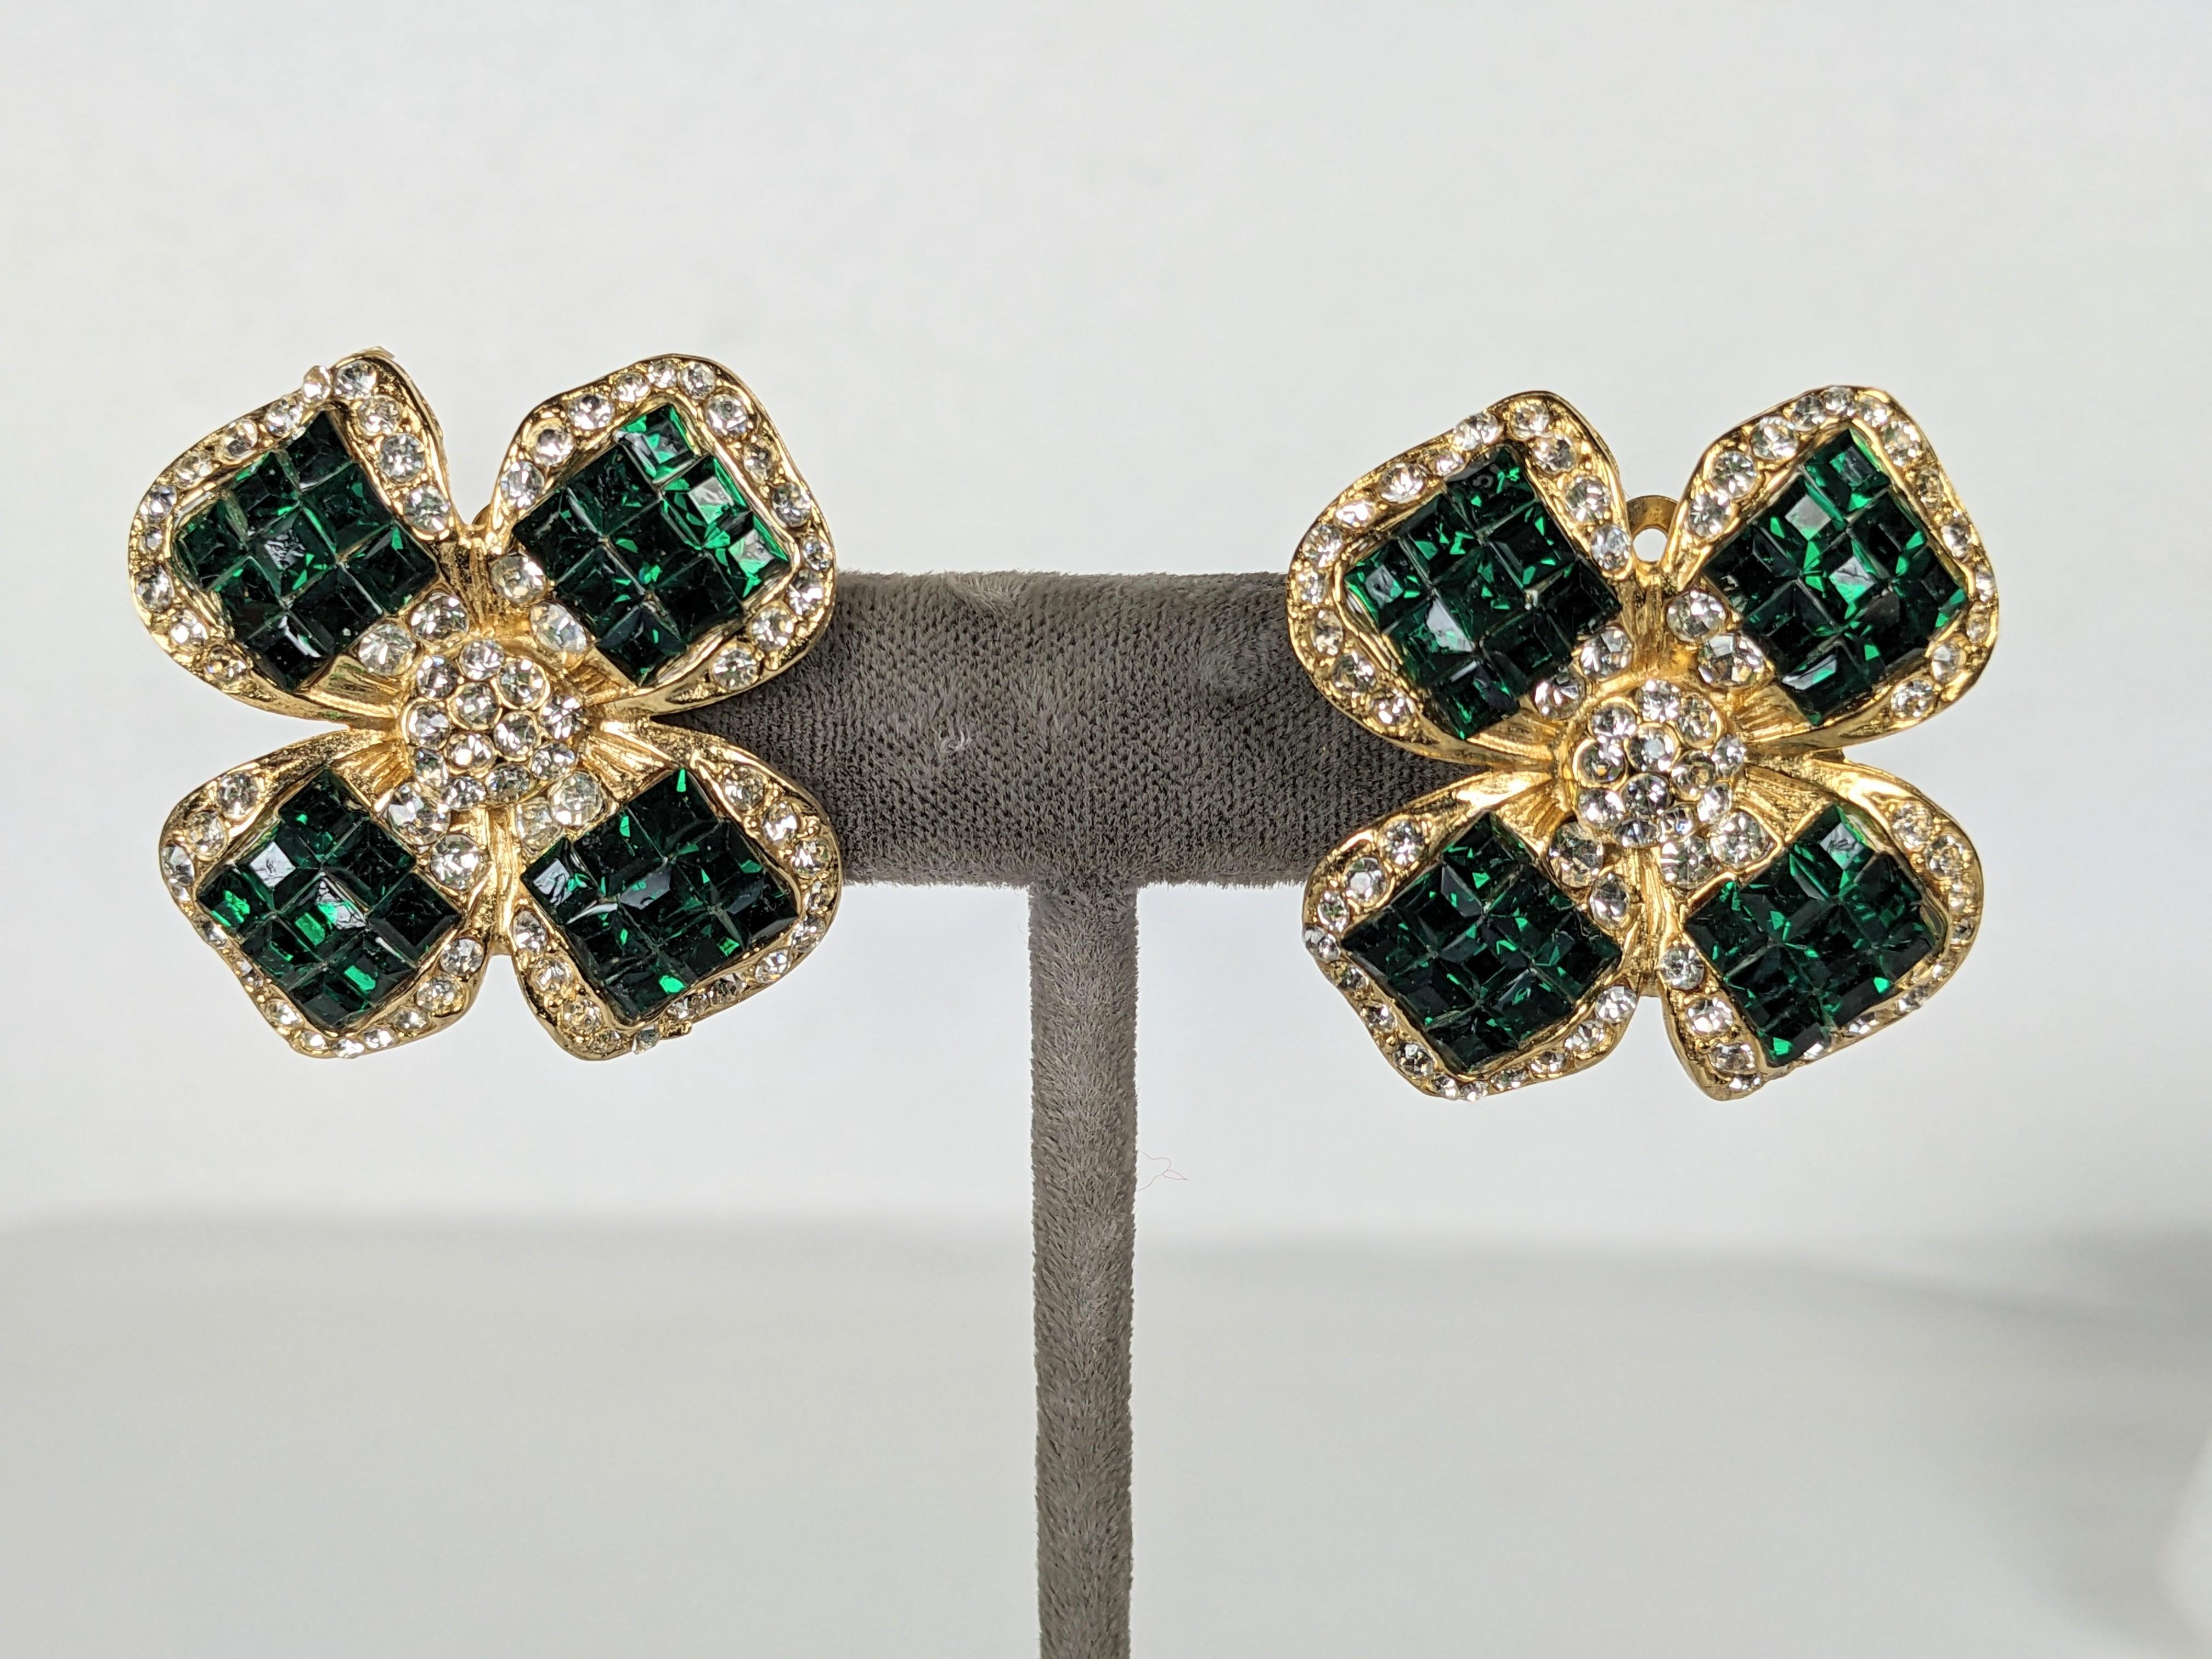 Invisibly Set Faux Emerald Flower Earrings from the 1990's. Clip back fittings with square cut emerald paste trimmed with crystals in gilt metal. 1990's USA. 1.25